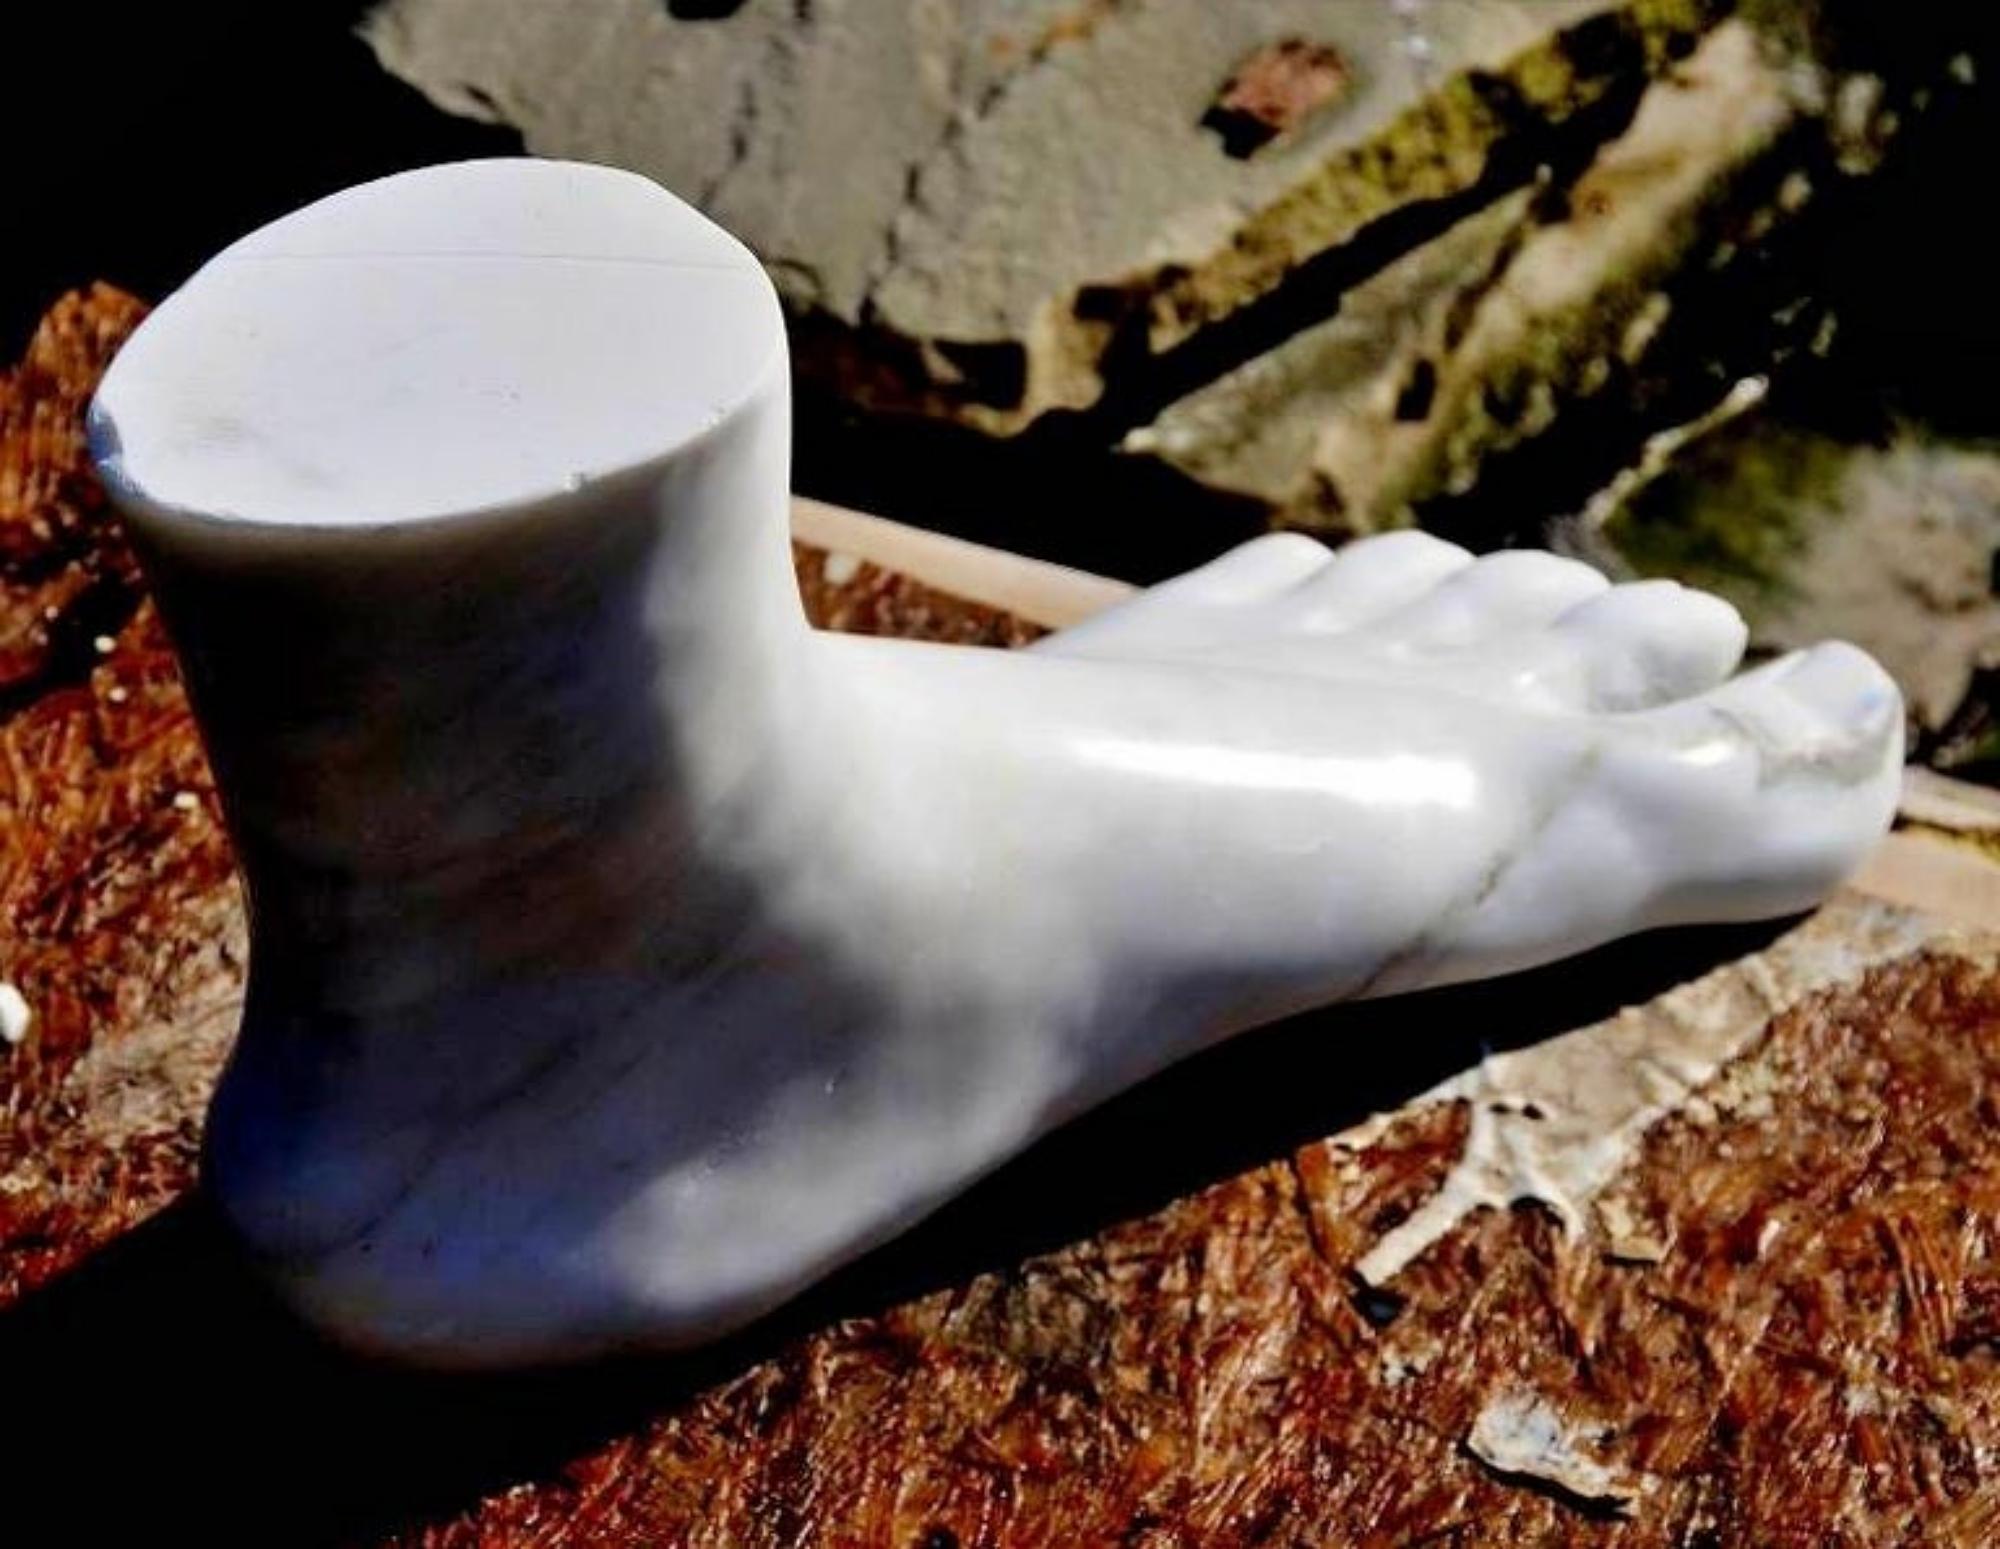 Foot in Carrara marble
late 19th century

Measures: Height 20 cm
Width 40 cm
Depth 13 cm

Perfect conditions.